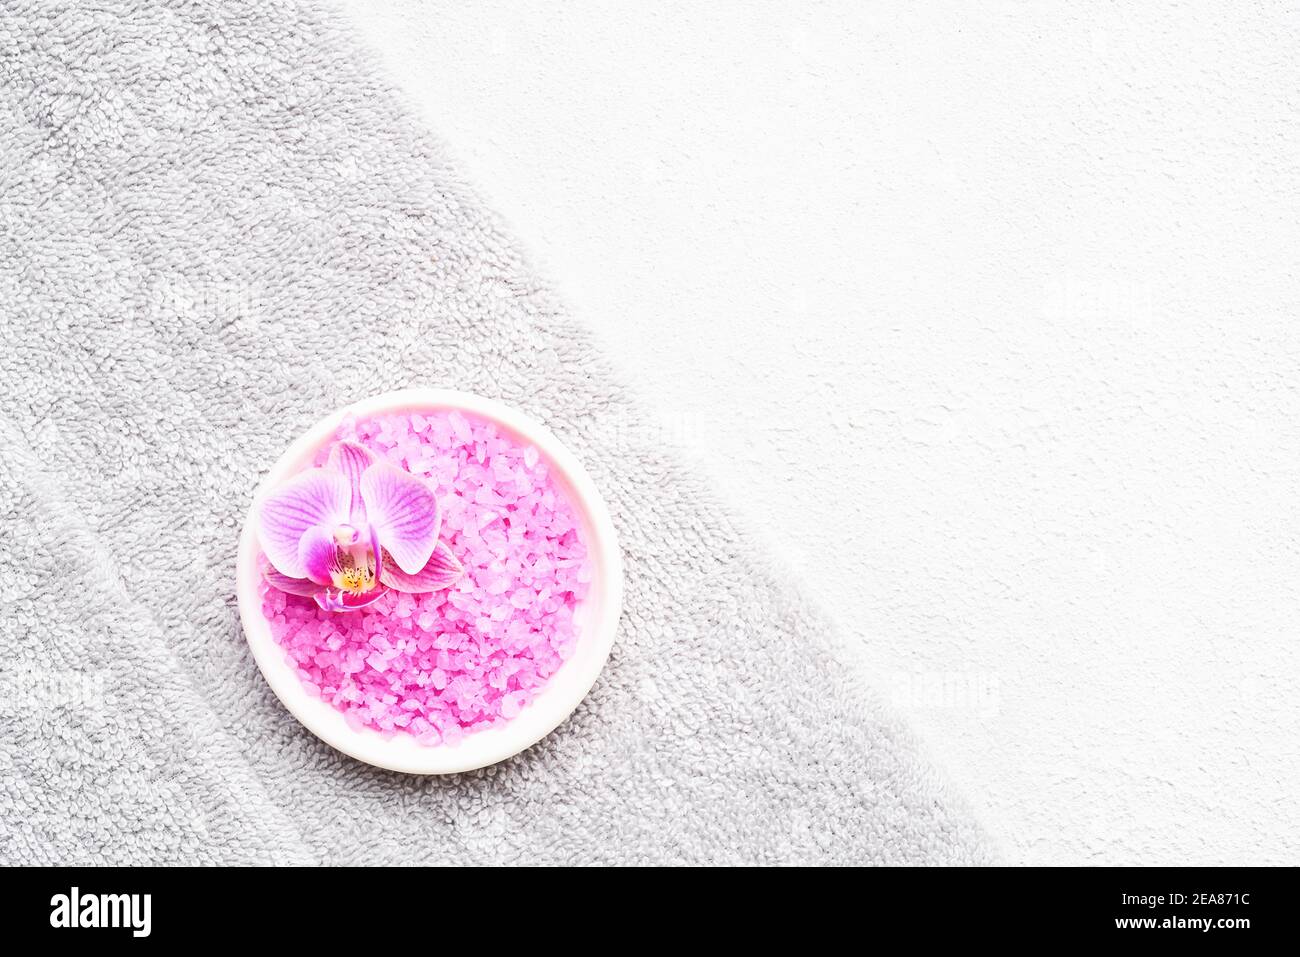 Rolled grey towels, pink bath salt, and orchid flower on a white concrete background. SPA, hygiene, wellness well-being, body care concept. Copy space, Stock Photo